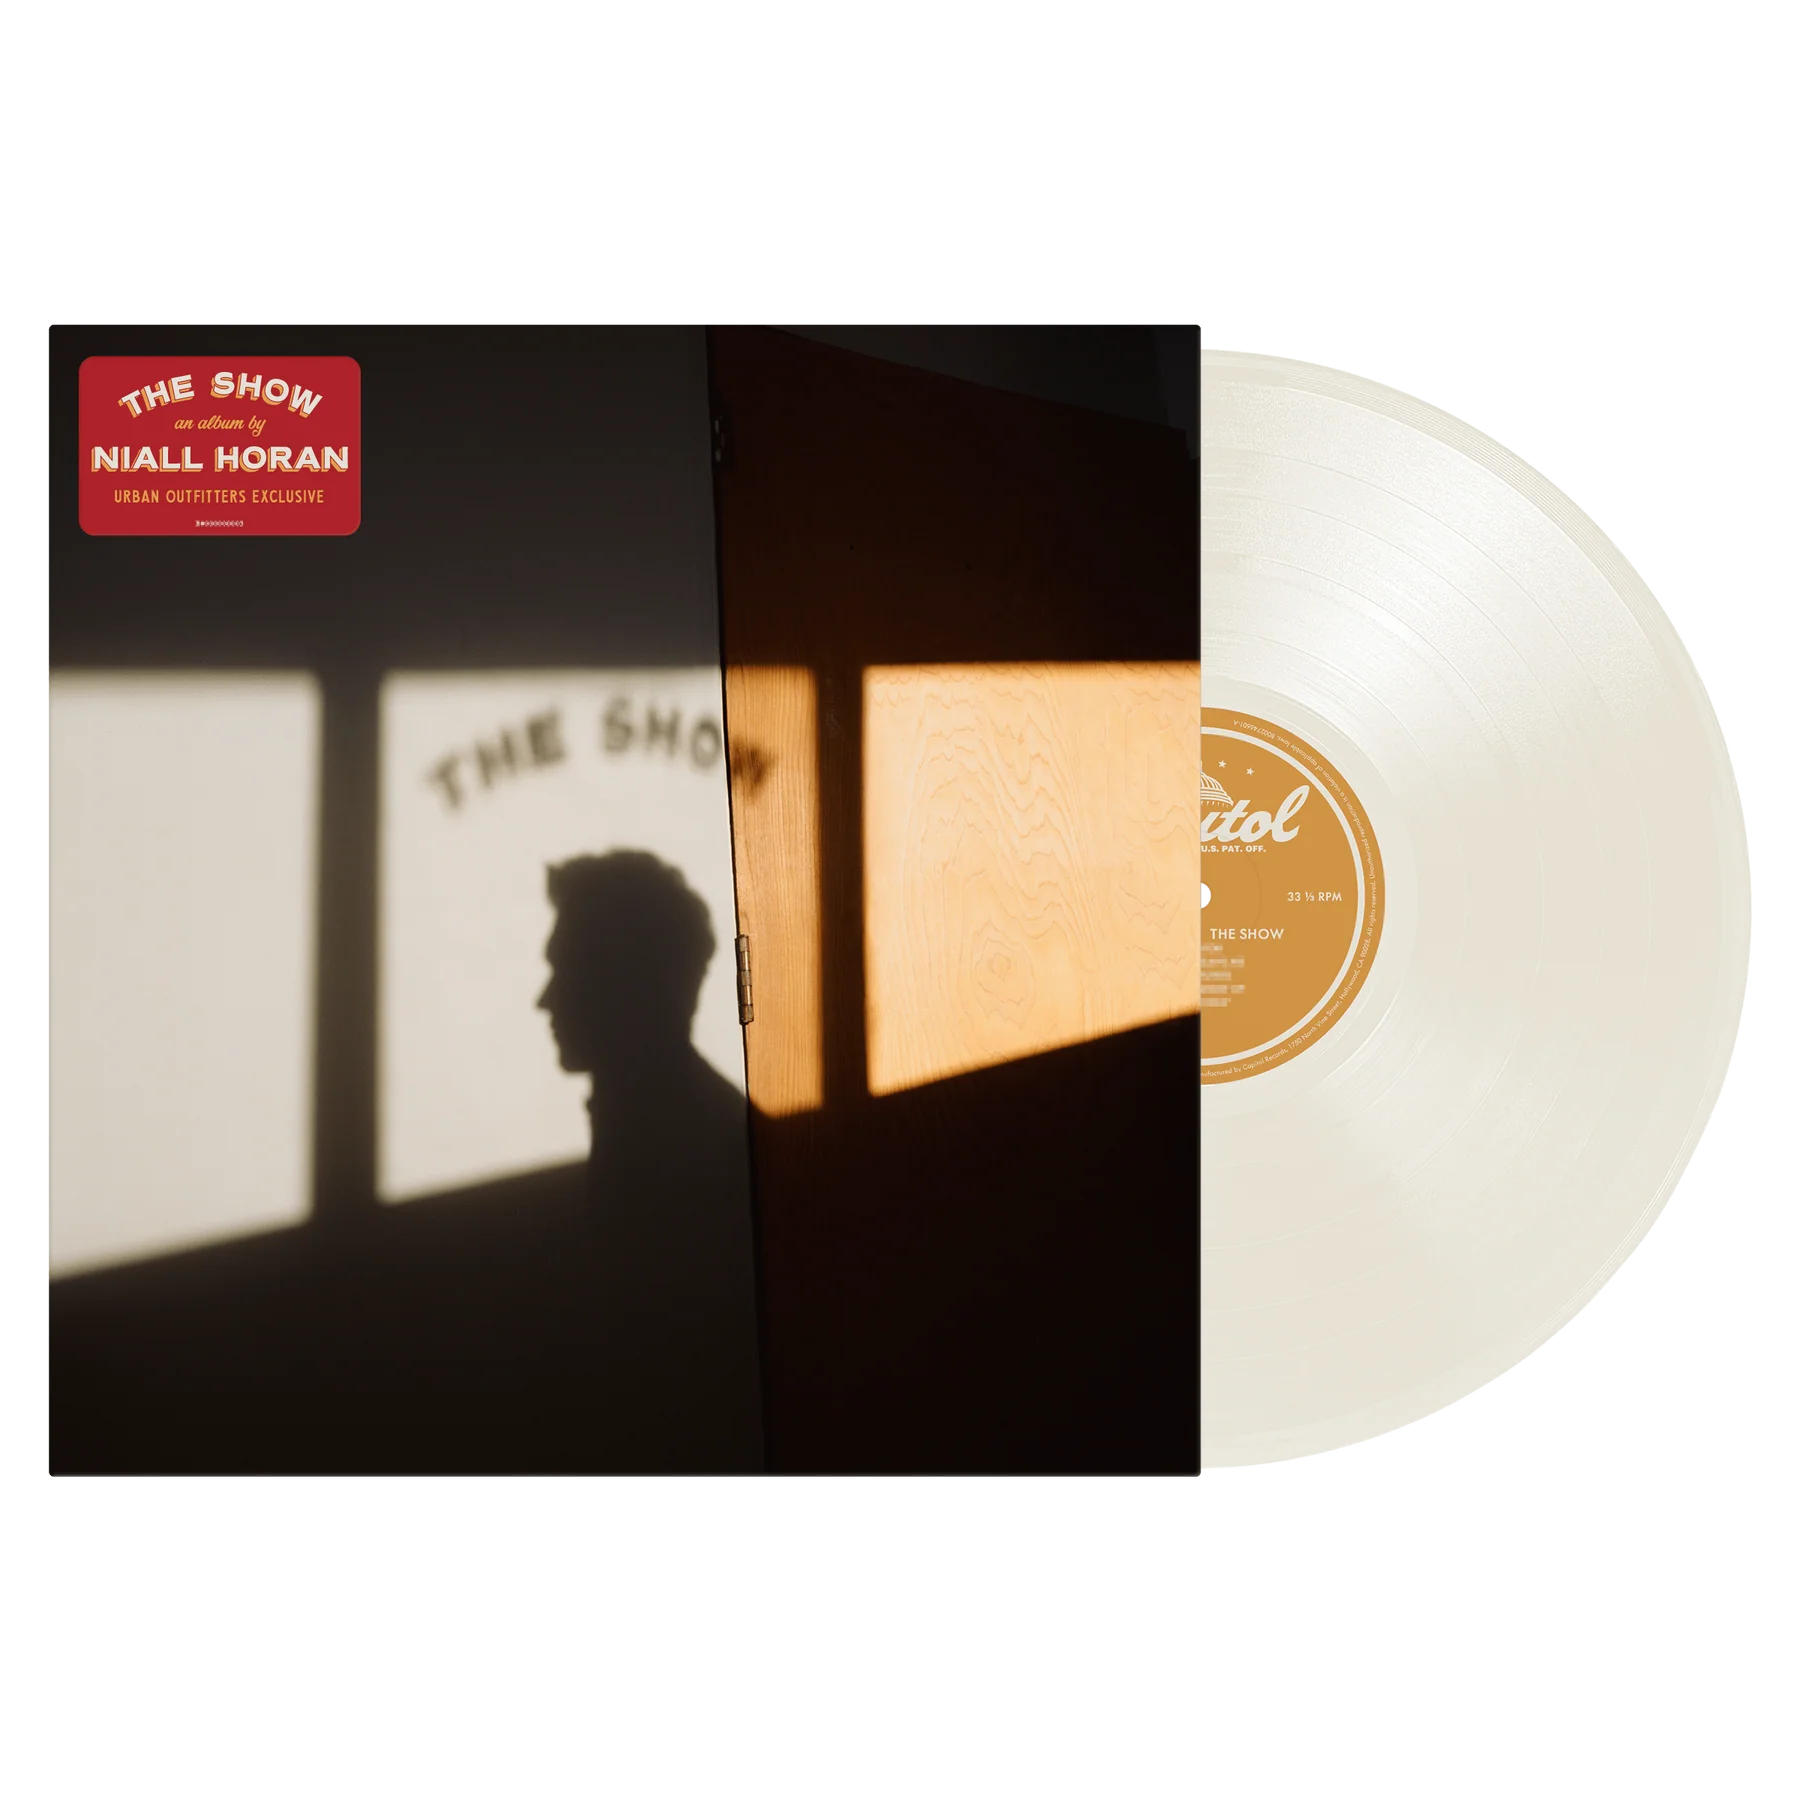 Niall Horan The Show LTD Frosted Glass LP - Ireland Vinyl